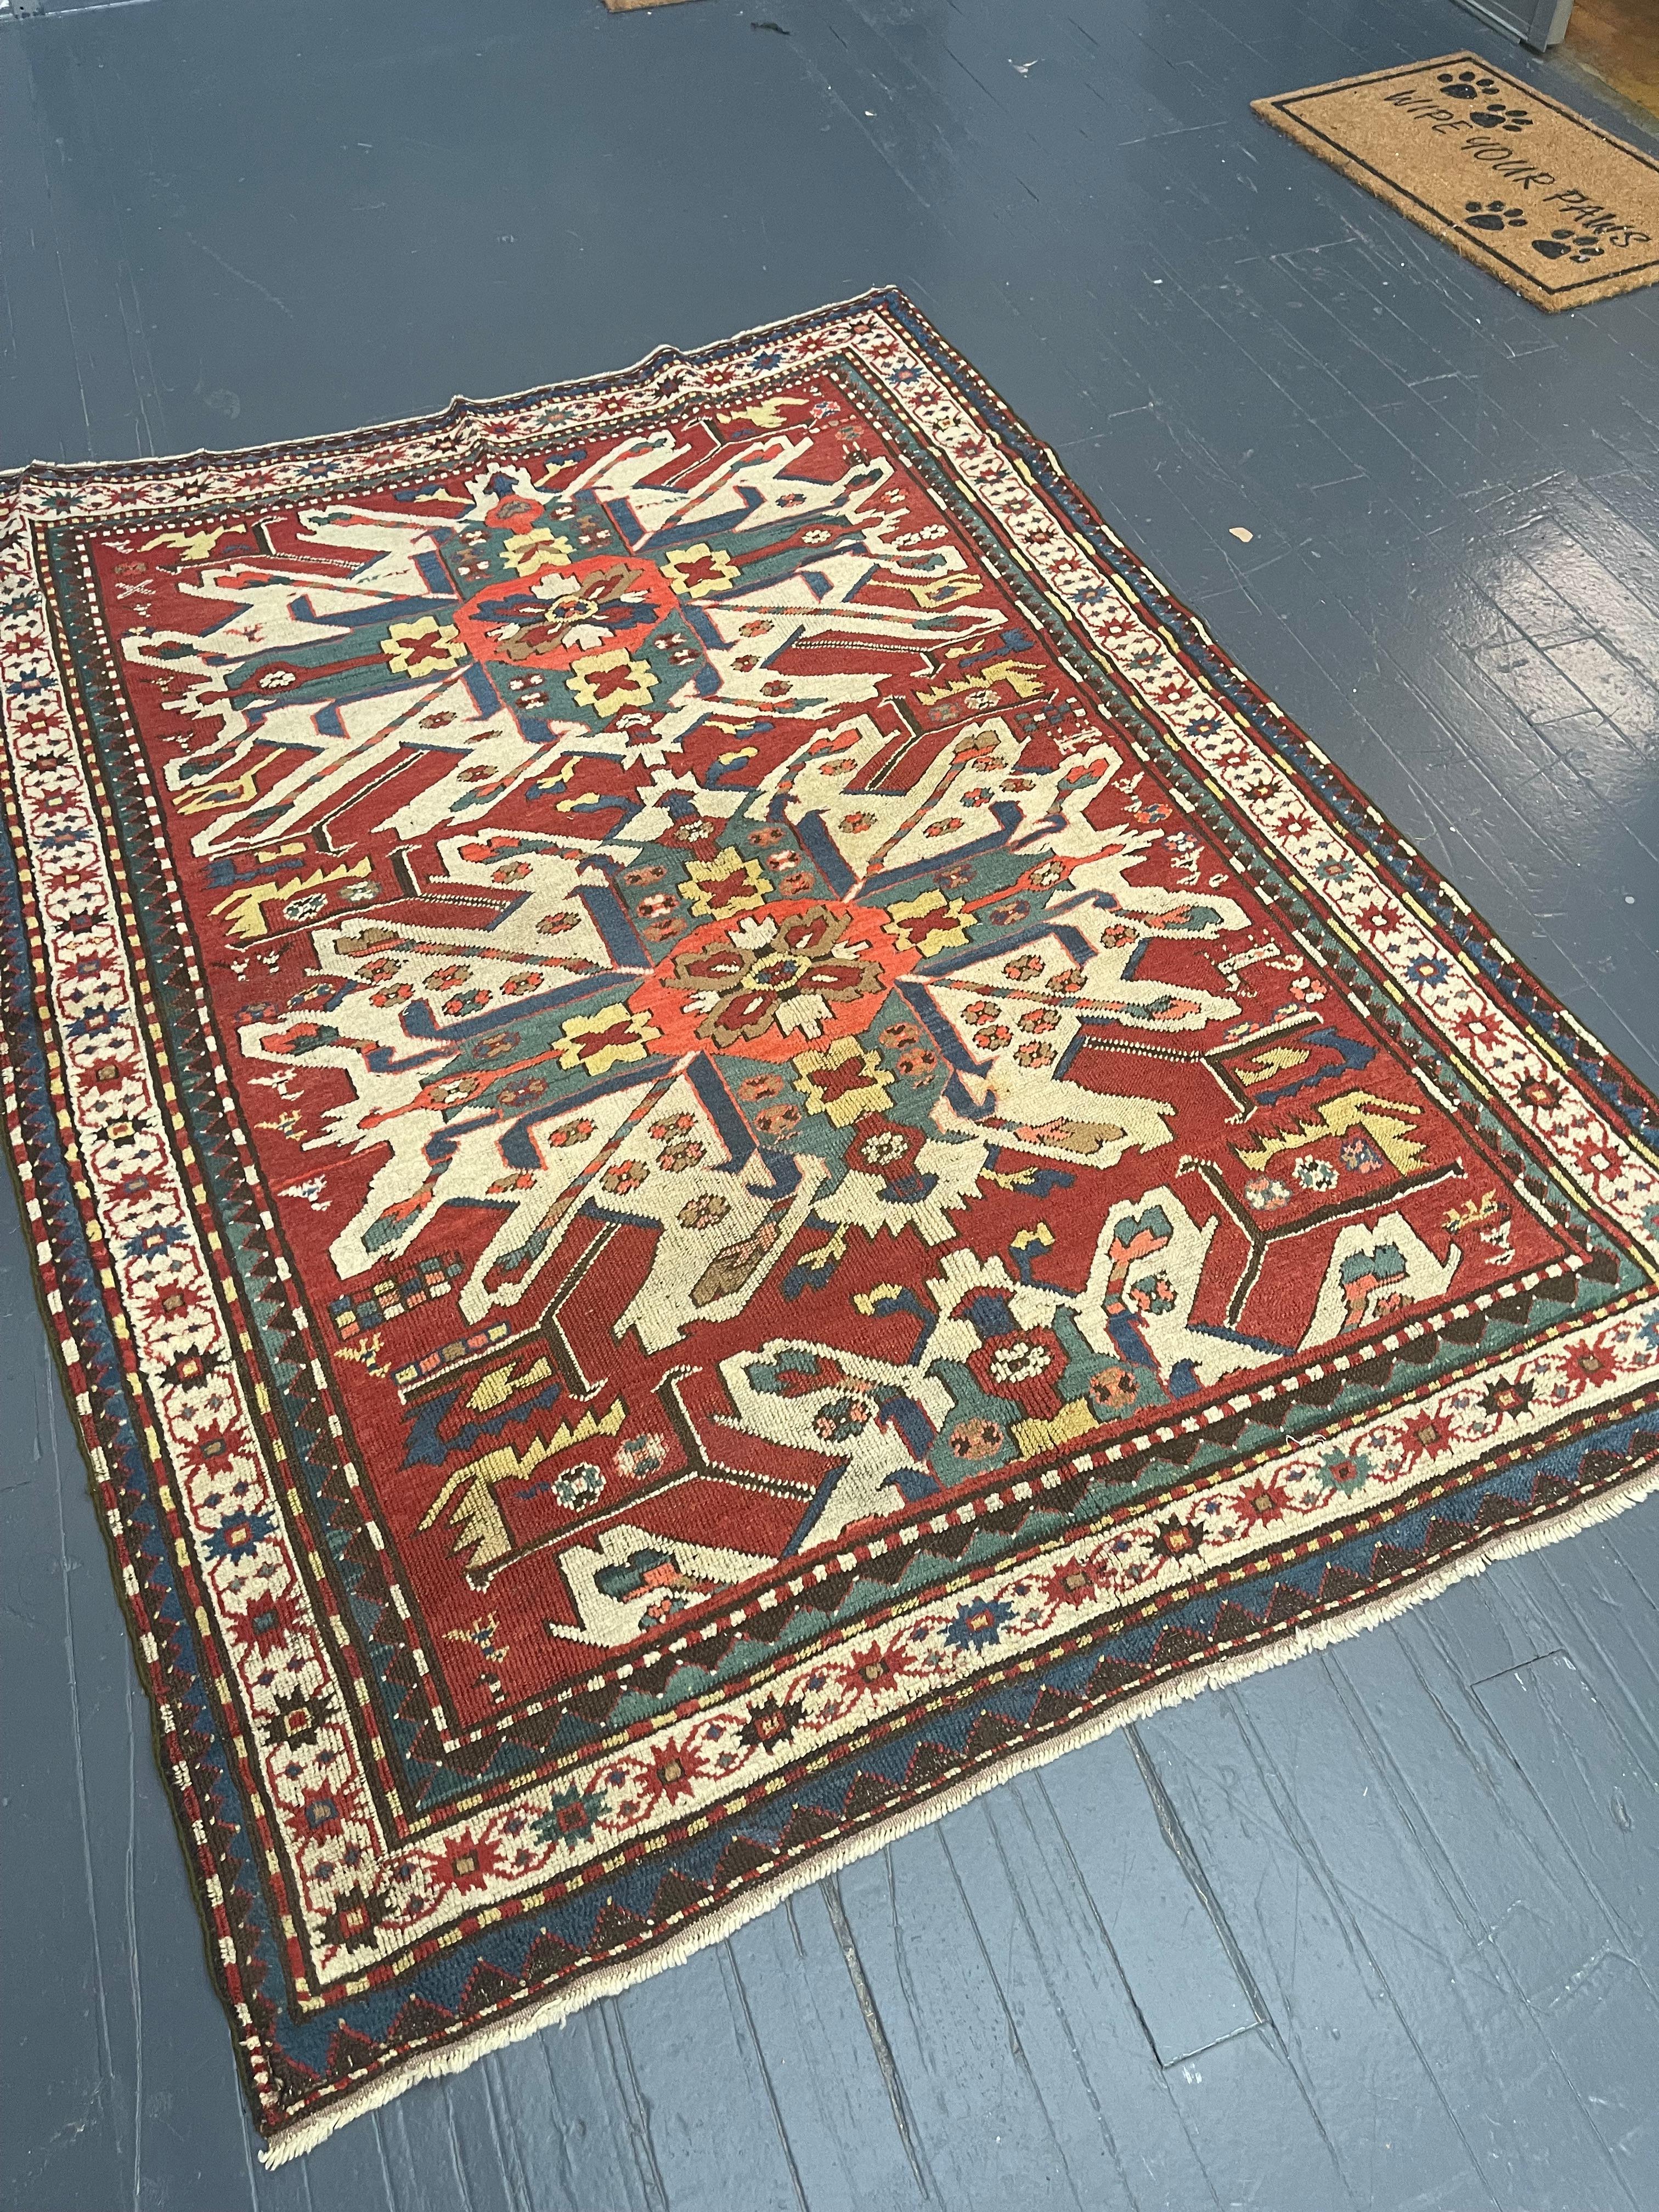 Antique Persian Rug Late 19th Century Eagle Kazak Chelaberd Wool Rug  In Good Condition For Sale In Jersey City, NJ